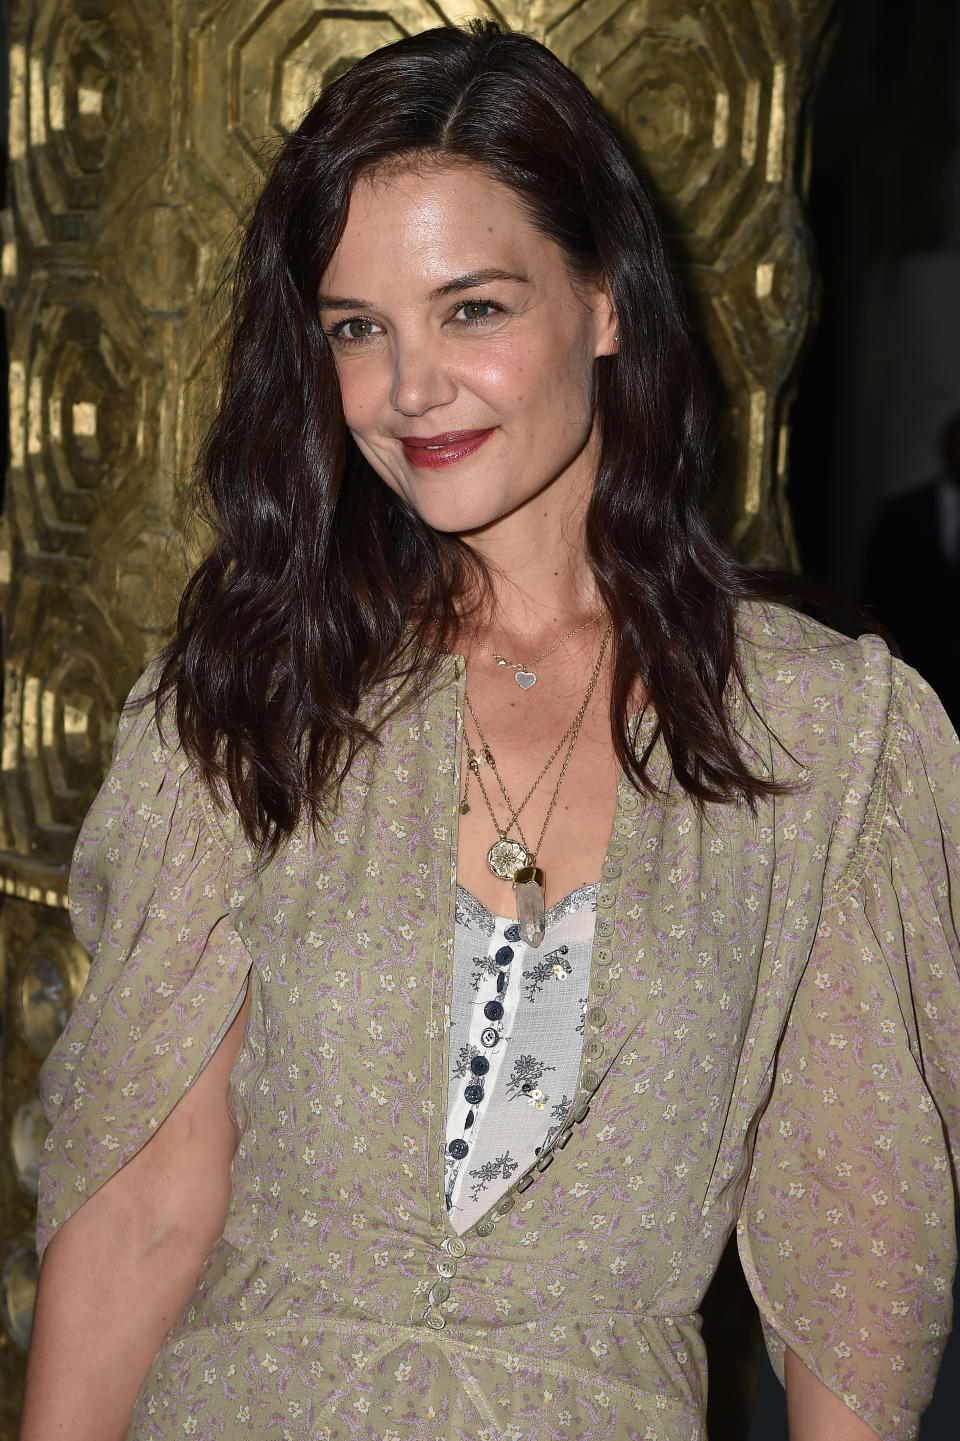 PARIS, FRANCE - FEBRUARY 27: (EDITORIAL USE ONLY) Katie Holmes attends the Chloe show as part of the Paris Fashion Week Womenswear Fall/Winter 2020/2021 on February 27, 2020 in Paris, France. (Photo by Dominique Charriau/WireImage)